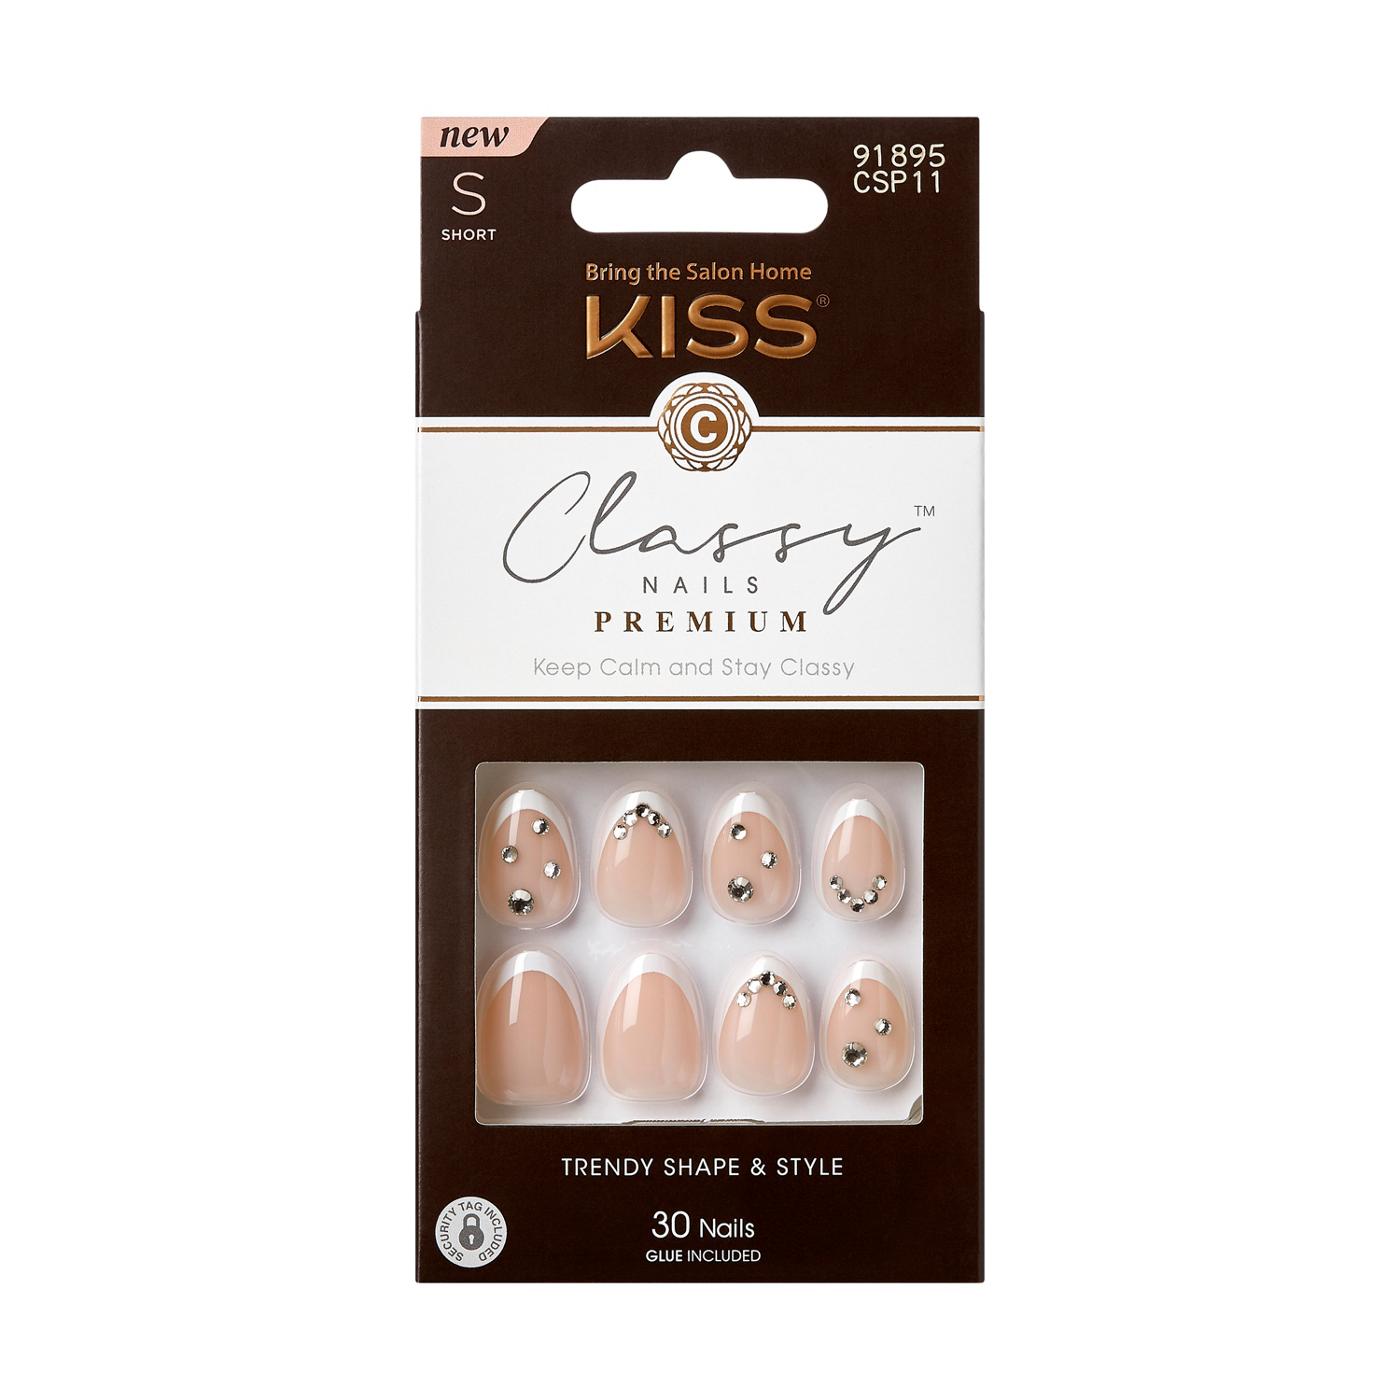 KISS Classy Premium Nails - Prevailing; image 1 of 6